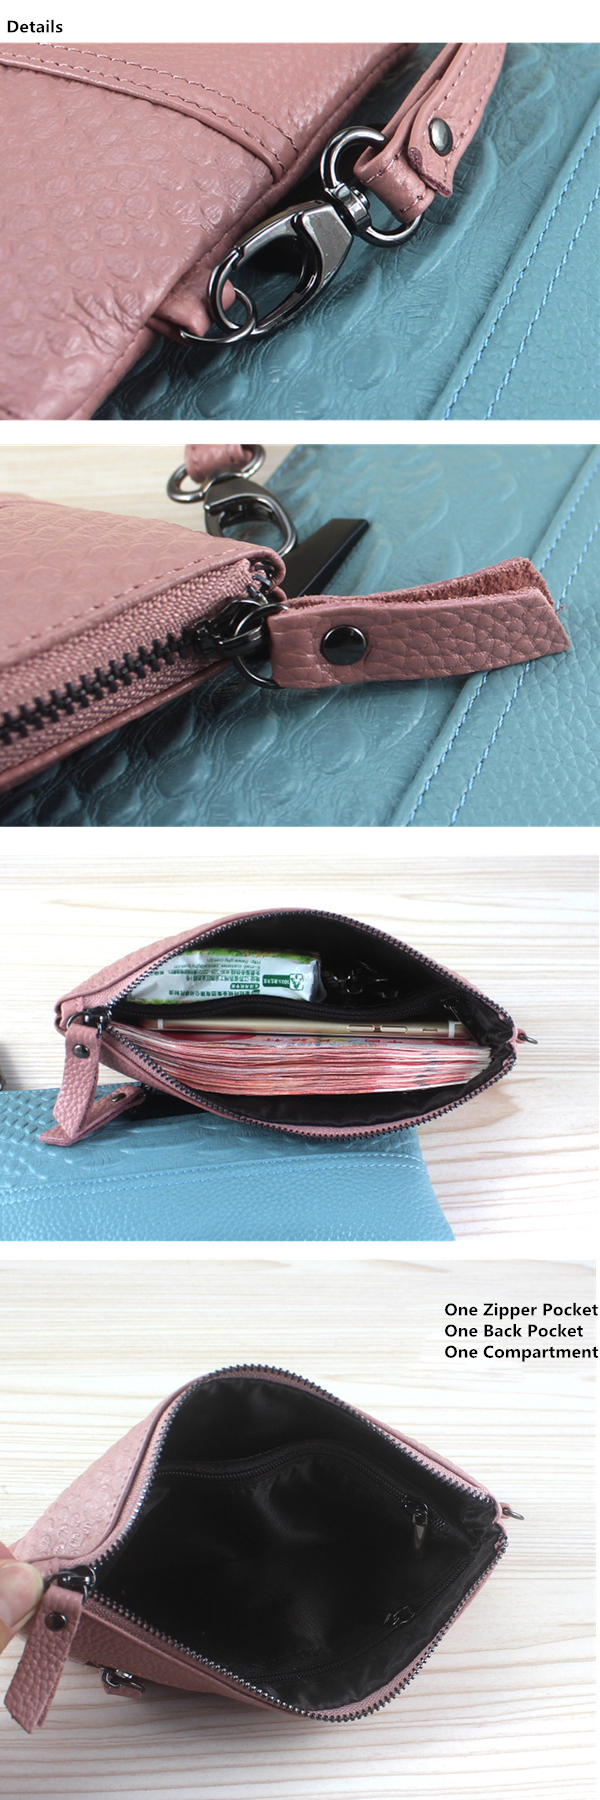 Women-Crocodile-Genuine-Cowhide-63-Inches-Phone-Clutch-Wallet-Keys-Card-Coin-Holder-6-Colors-1108568